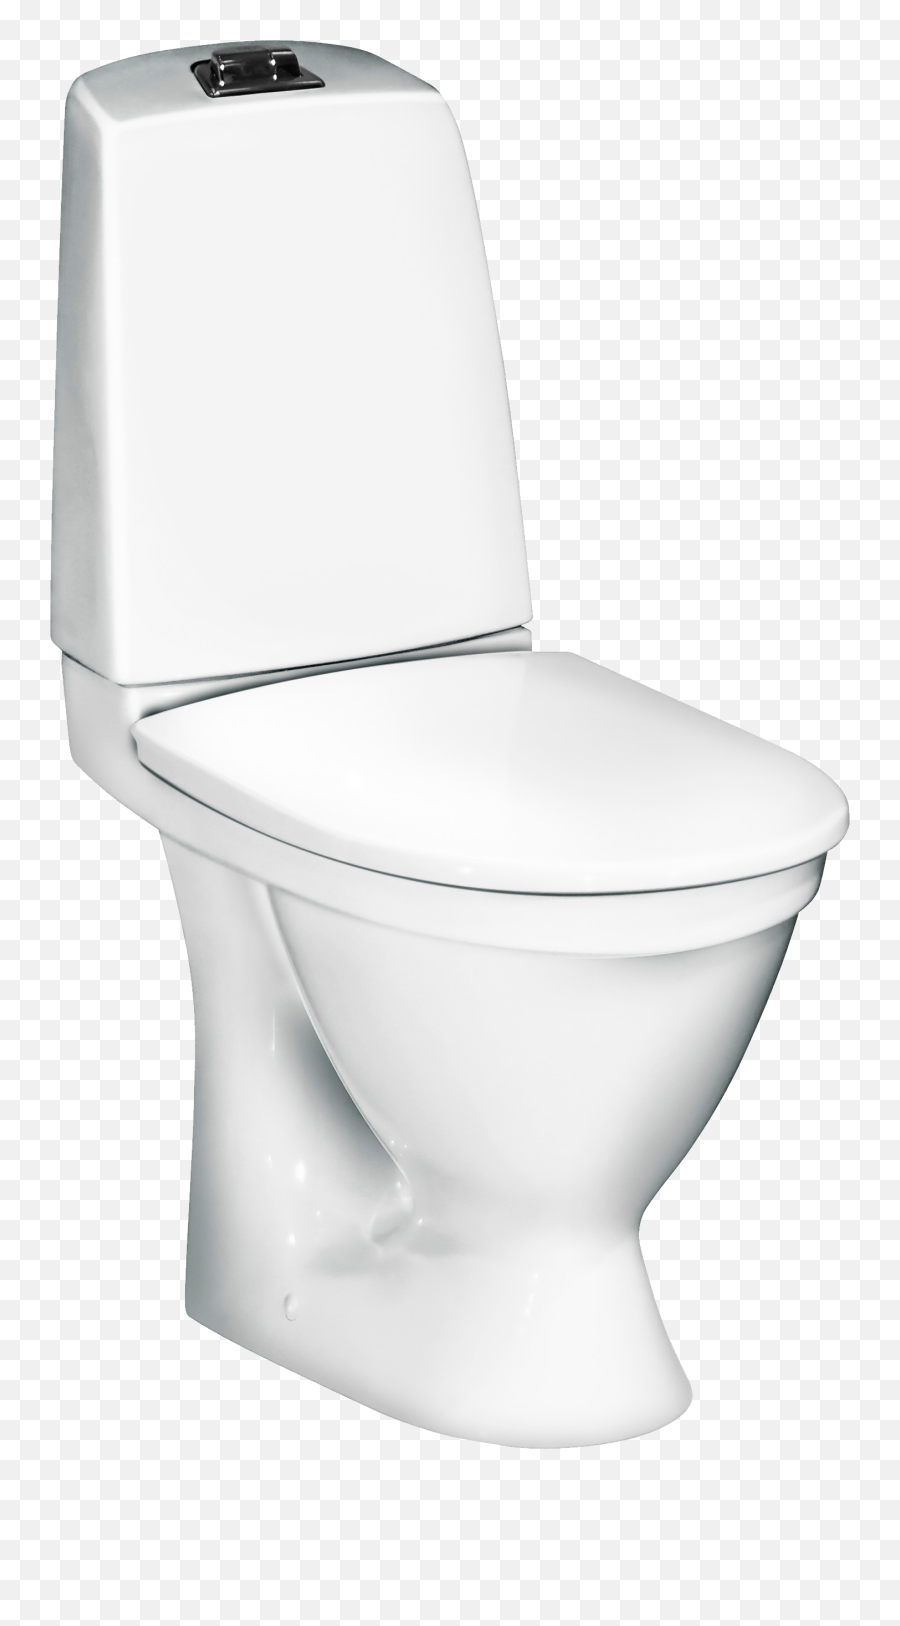 Toilet Png Image - Comods,Toilet Png